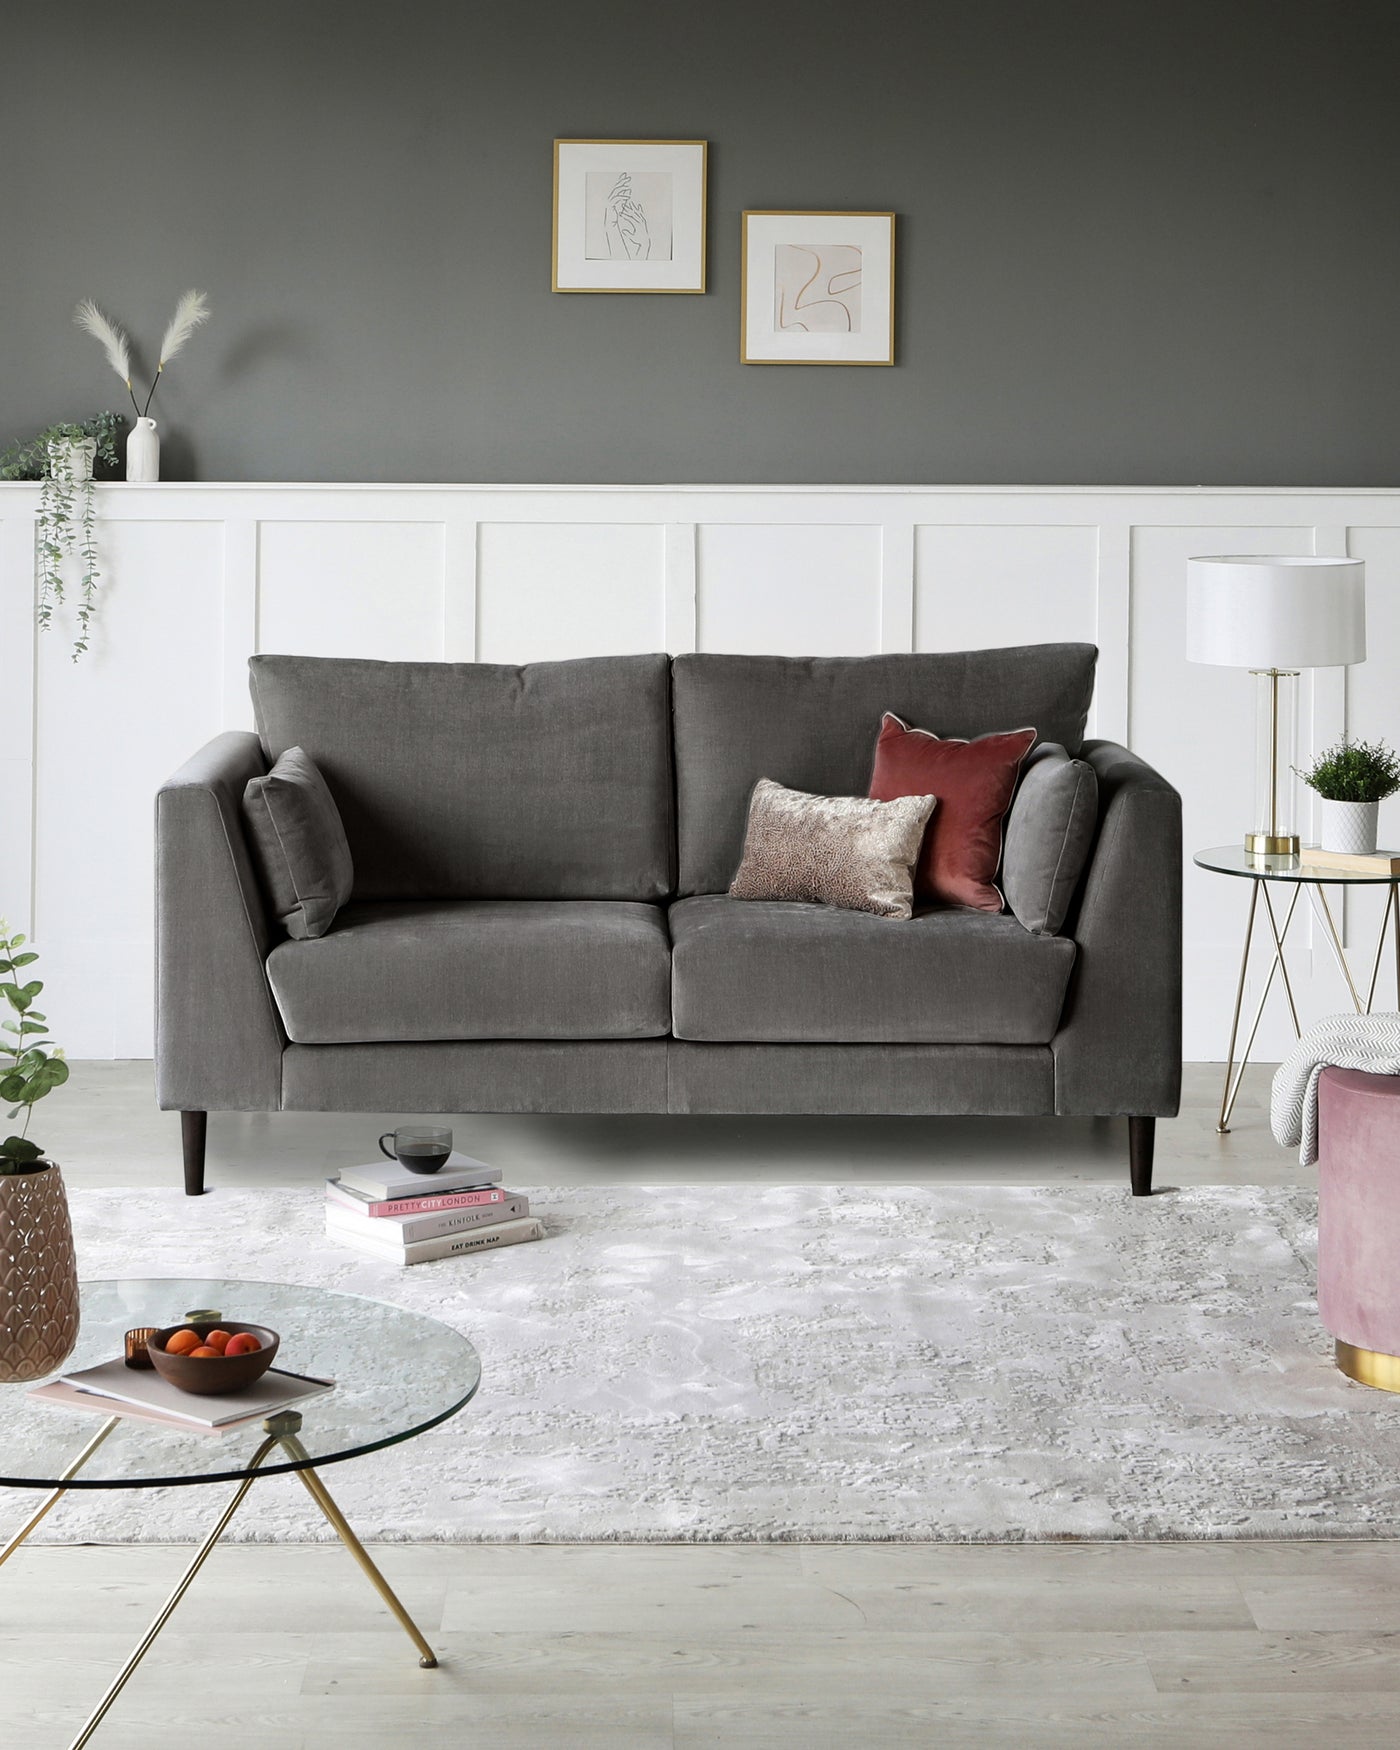 Elegant living room furniture arrangement featuring a modern, grey fabric sofa with plush cushioning and clean lines, accompanied by a gold-framed circular glass coffee table with a unique crossed-leg design. A chic side table with a white round tabletop and golden legs is set beside a contemporary white floor lamp with a cylindrical shade. A textured light-coloured area rug anchors the space, adding a cosy layer to the wooden flooring.